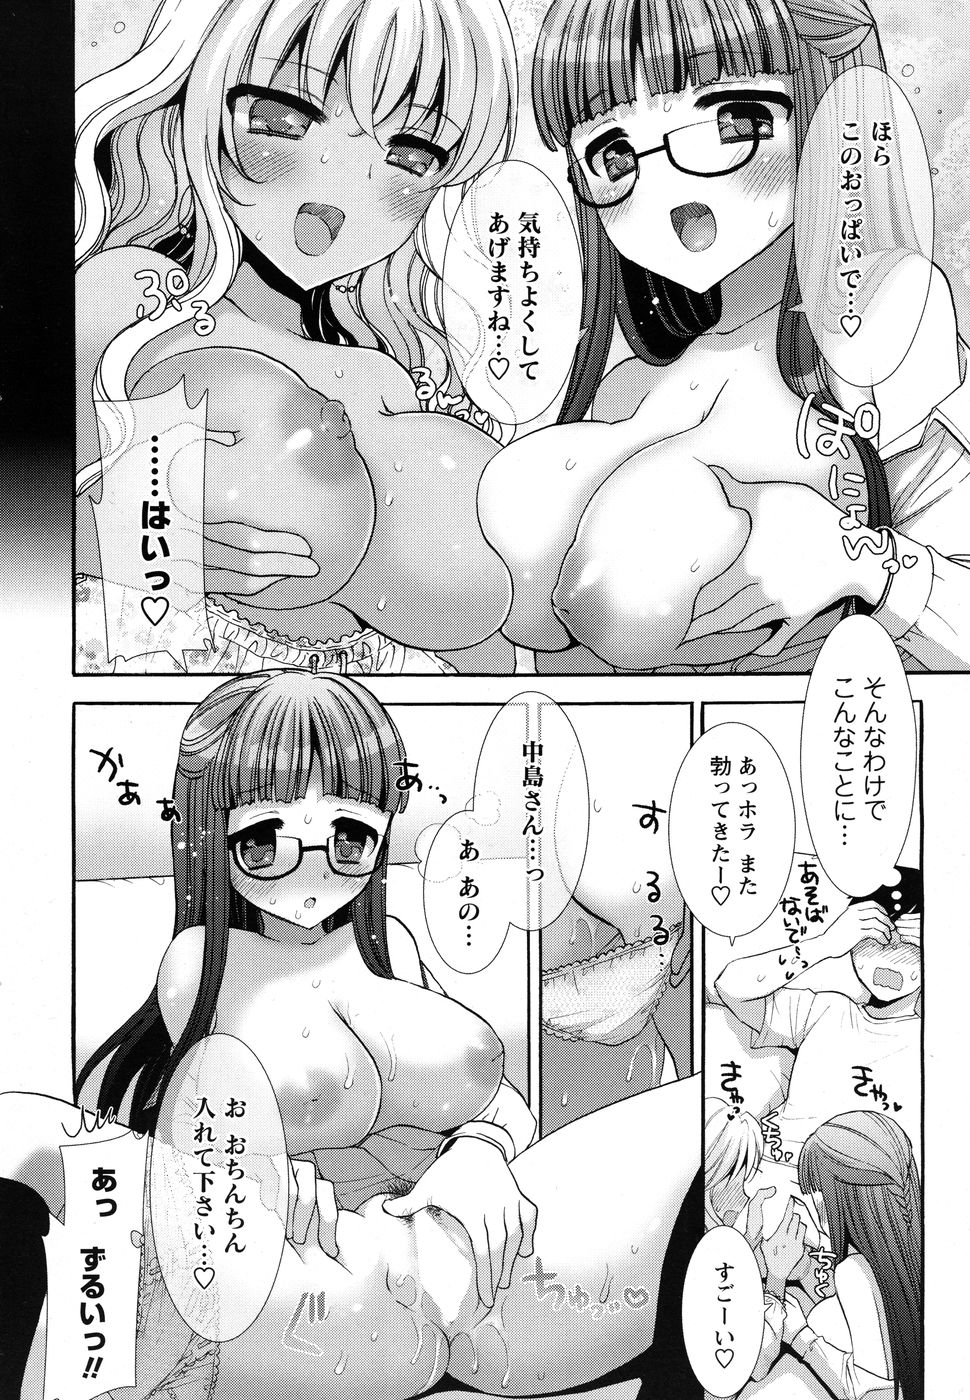 Men's Young Special Ikazuchi 2010-06 Vol. 14 page 15 full